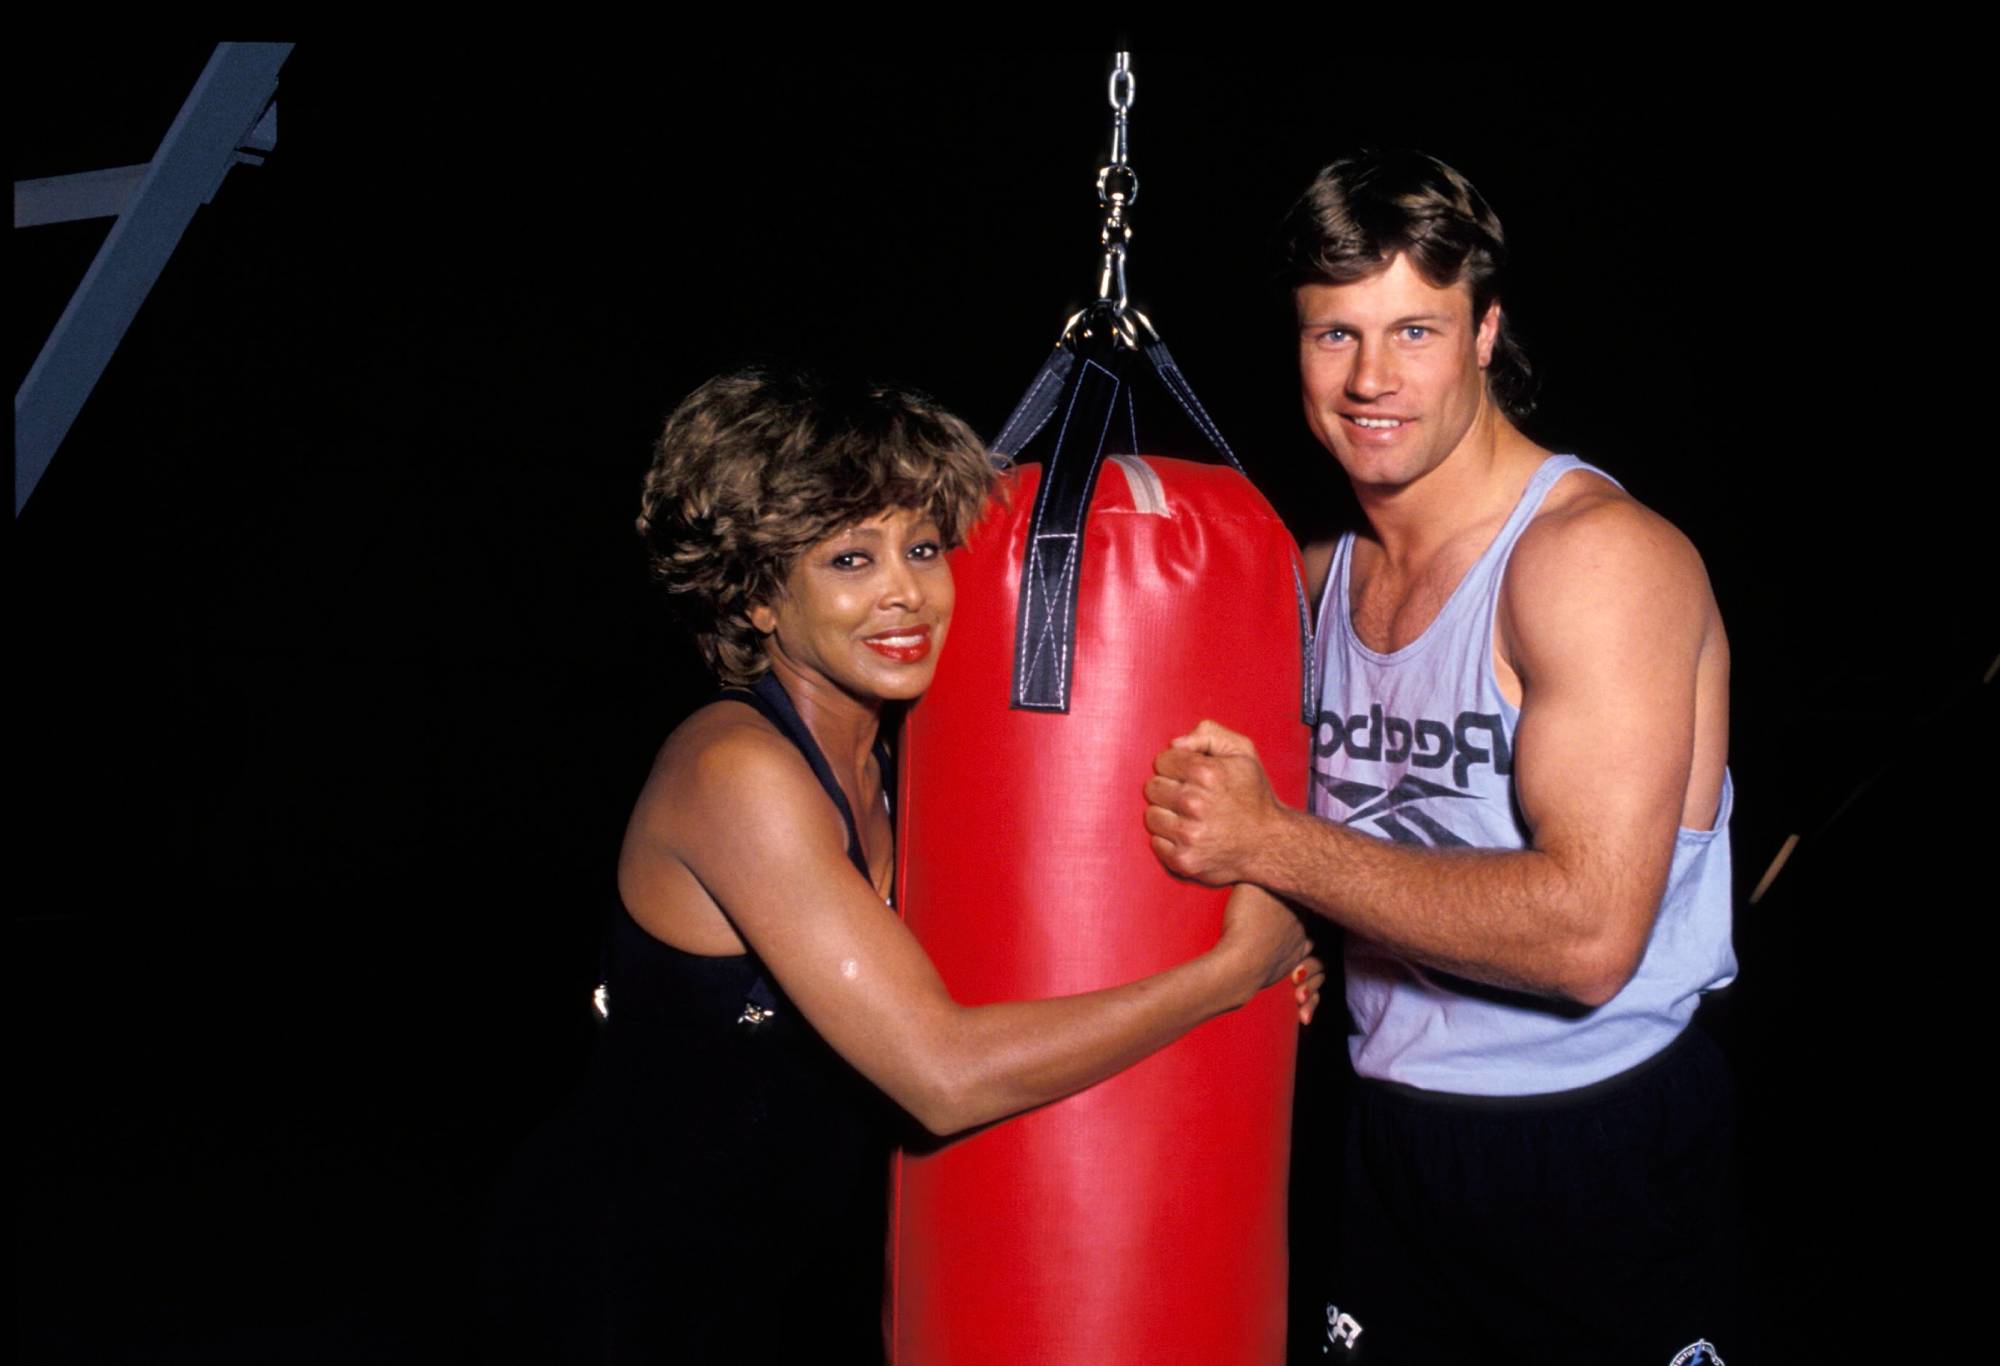 TINA TURNER AND RUGBY LEAGUE PERSONALITY ANDREW ETTINGHAUSEN IN SYDNEY.(Photo by Patrick Riviere/Getty Images)